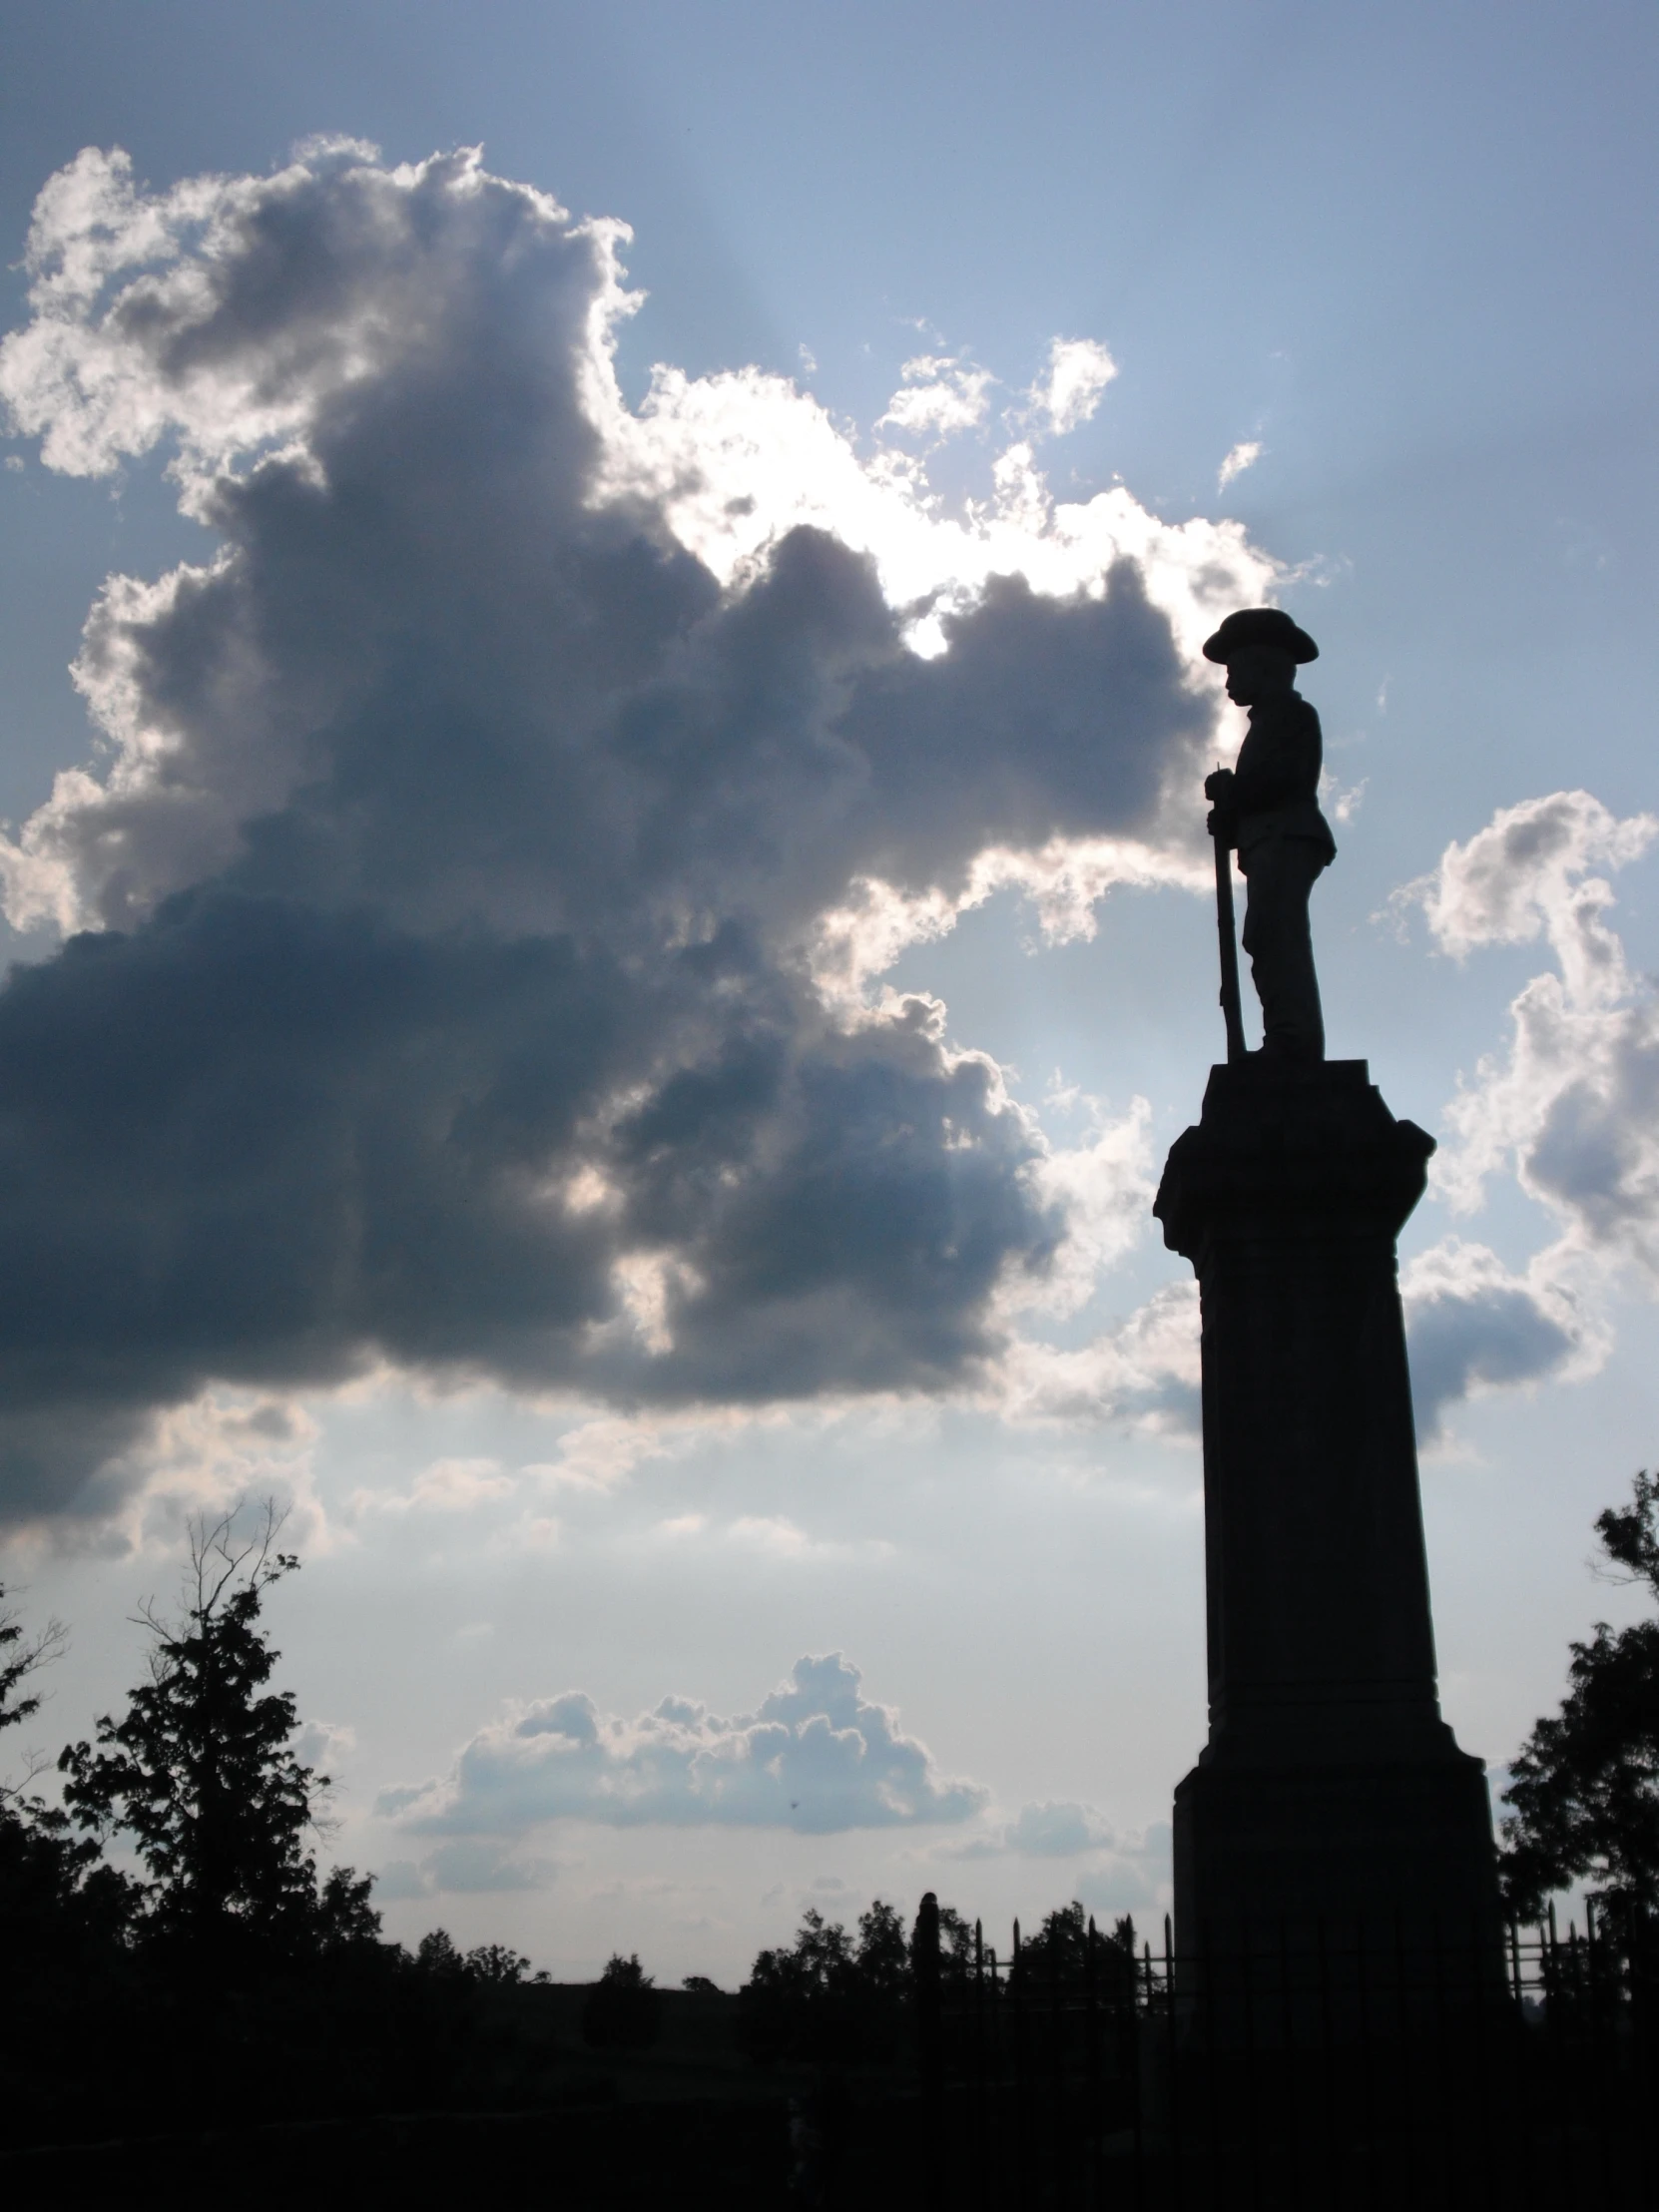 a statue under cloudy skies with dark clouds